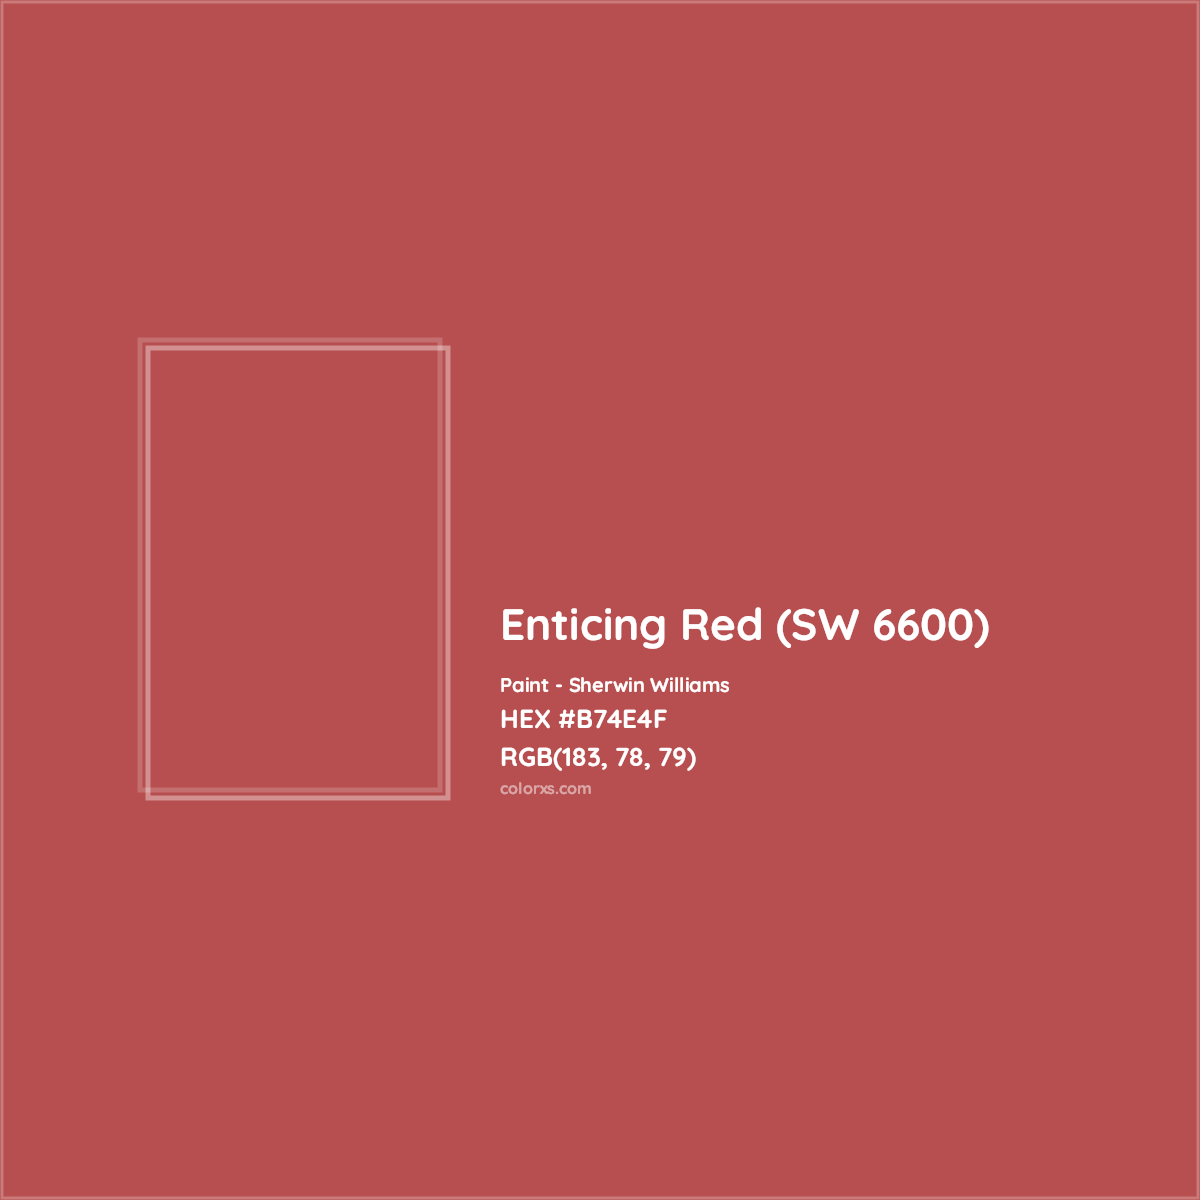 HEX #B74E4F Enticing Red (SW 6600) Paint Sherwin Williams - Color Code